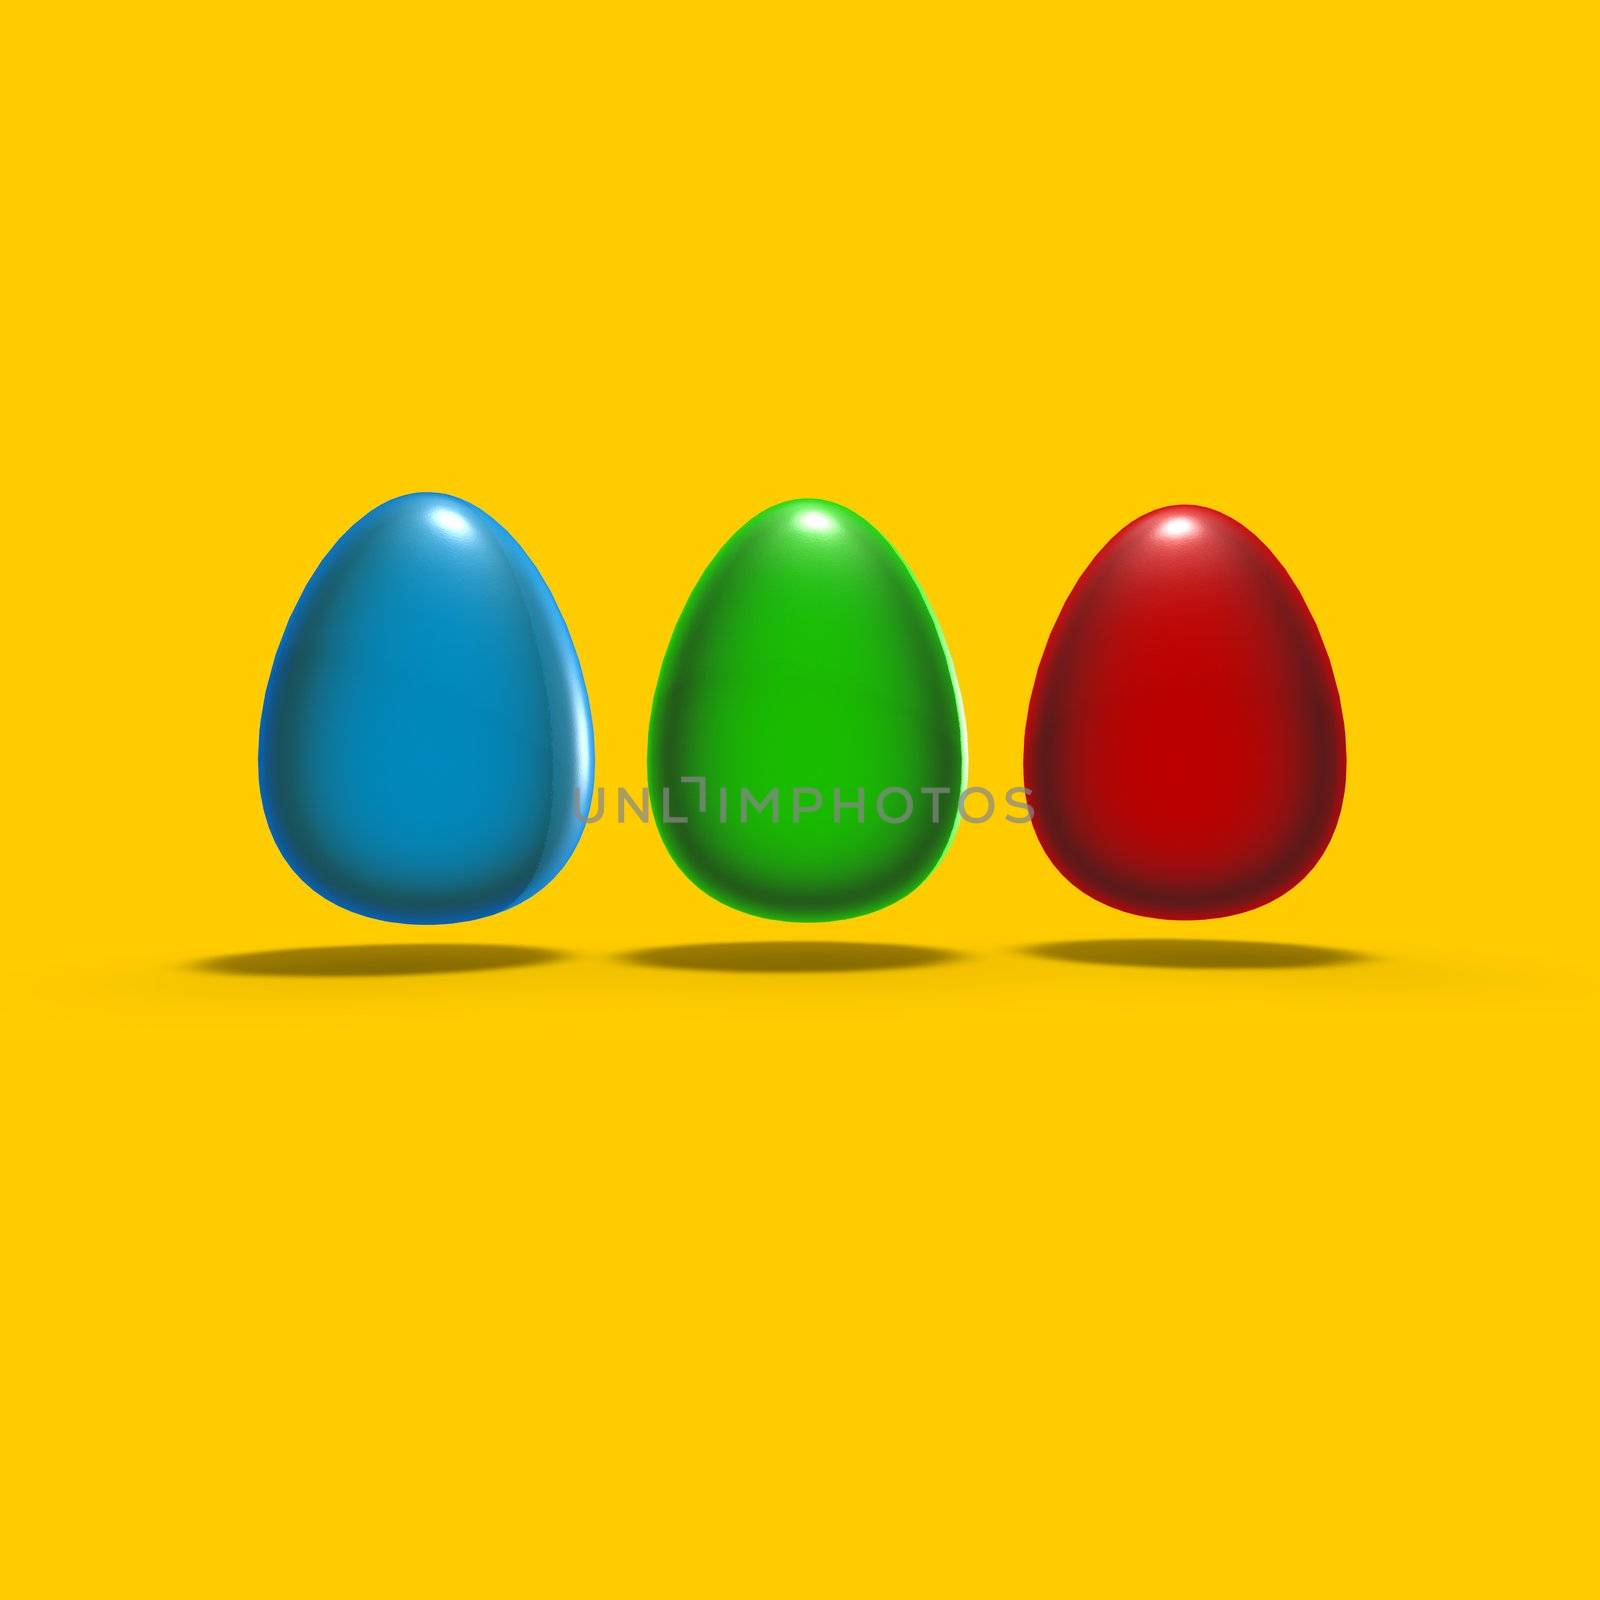 rgb easter eggs on yellow background - 3d illustration